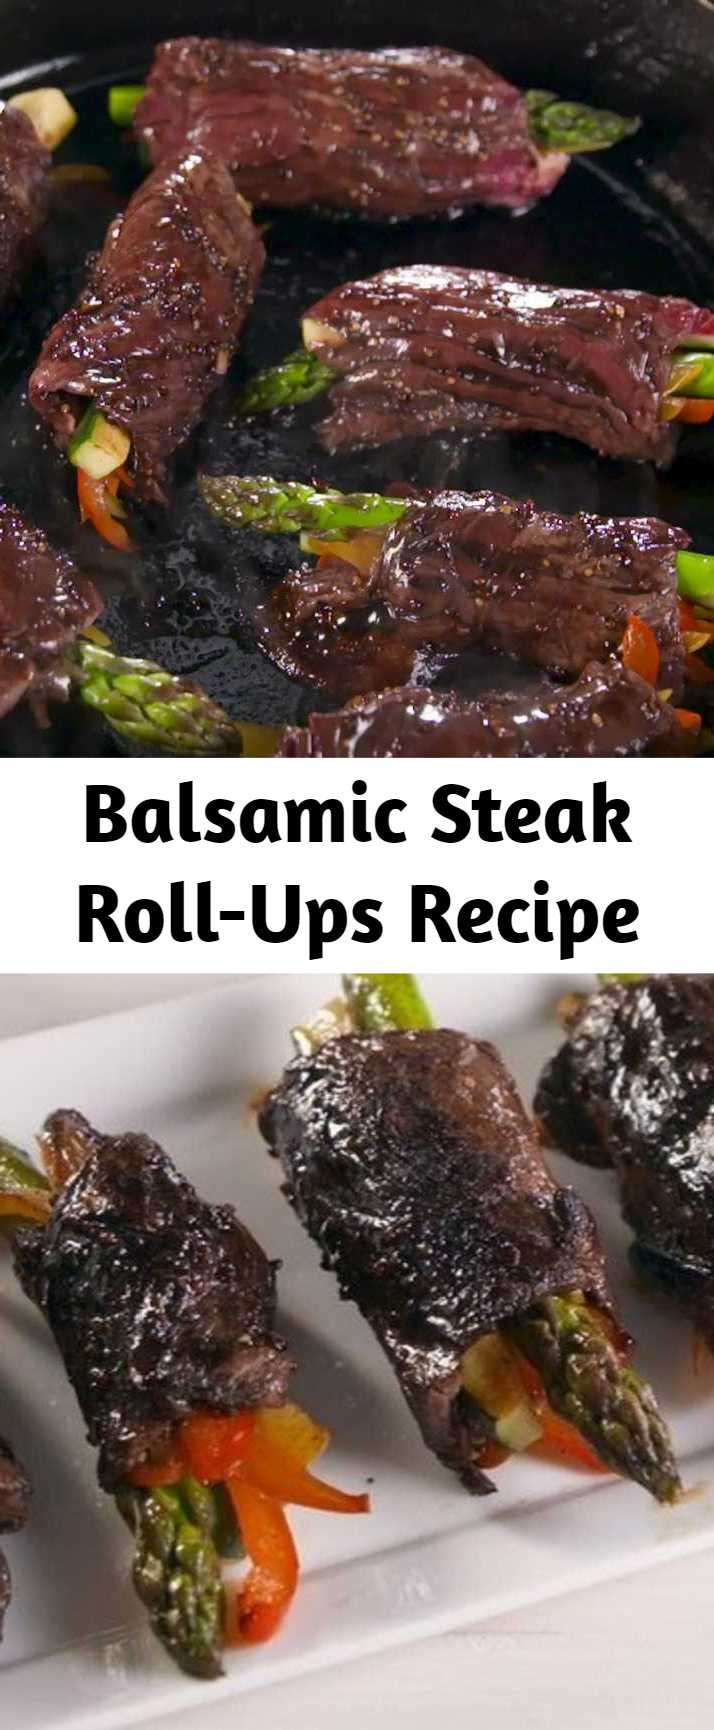 Balsamic Steak Roll-Ups Recipe - Securing the roll-ups with toothpicks makes them MUCH easier to cook. Just don't forget to remove them when it's time for serving! #easyrecipe #steak #lowcarb #meat #party